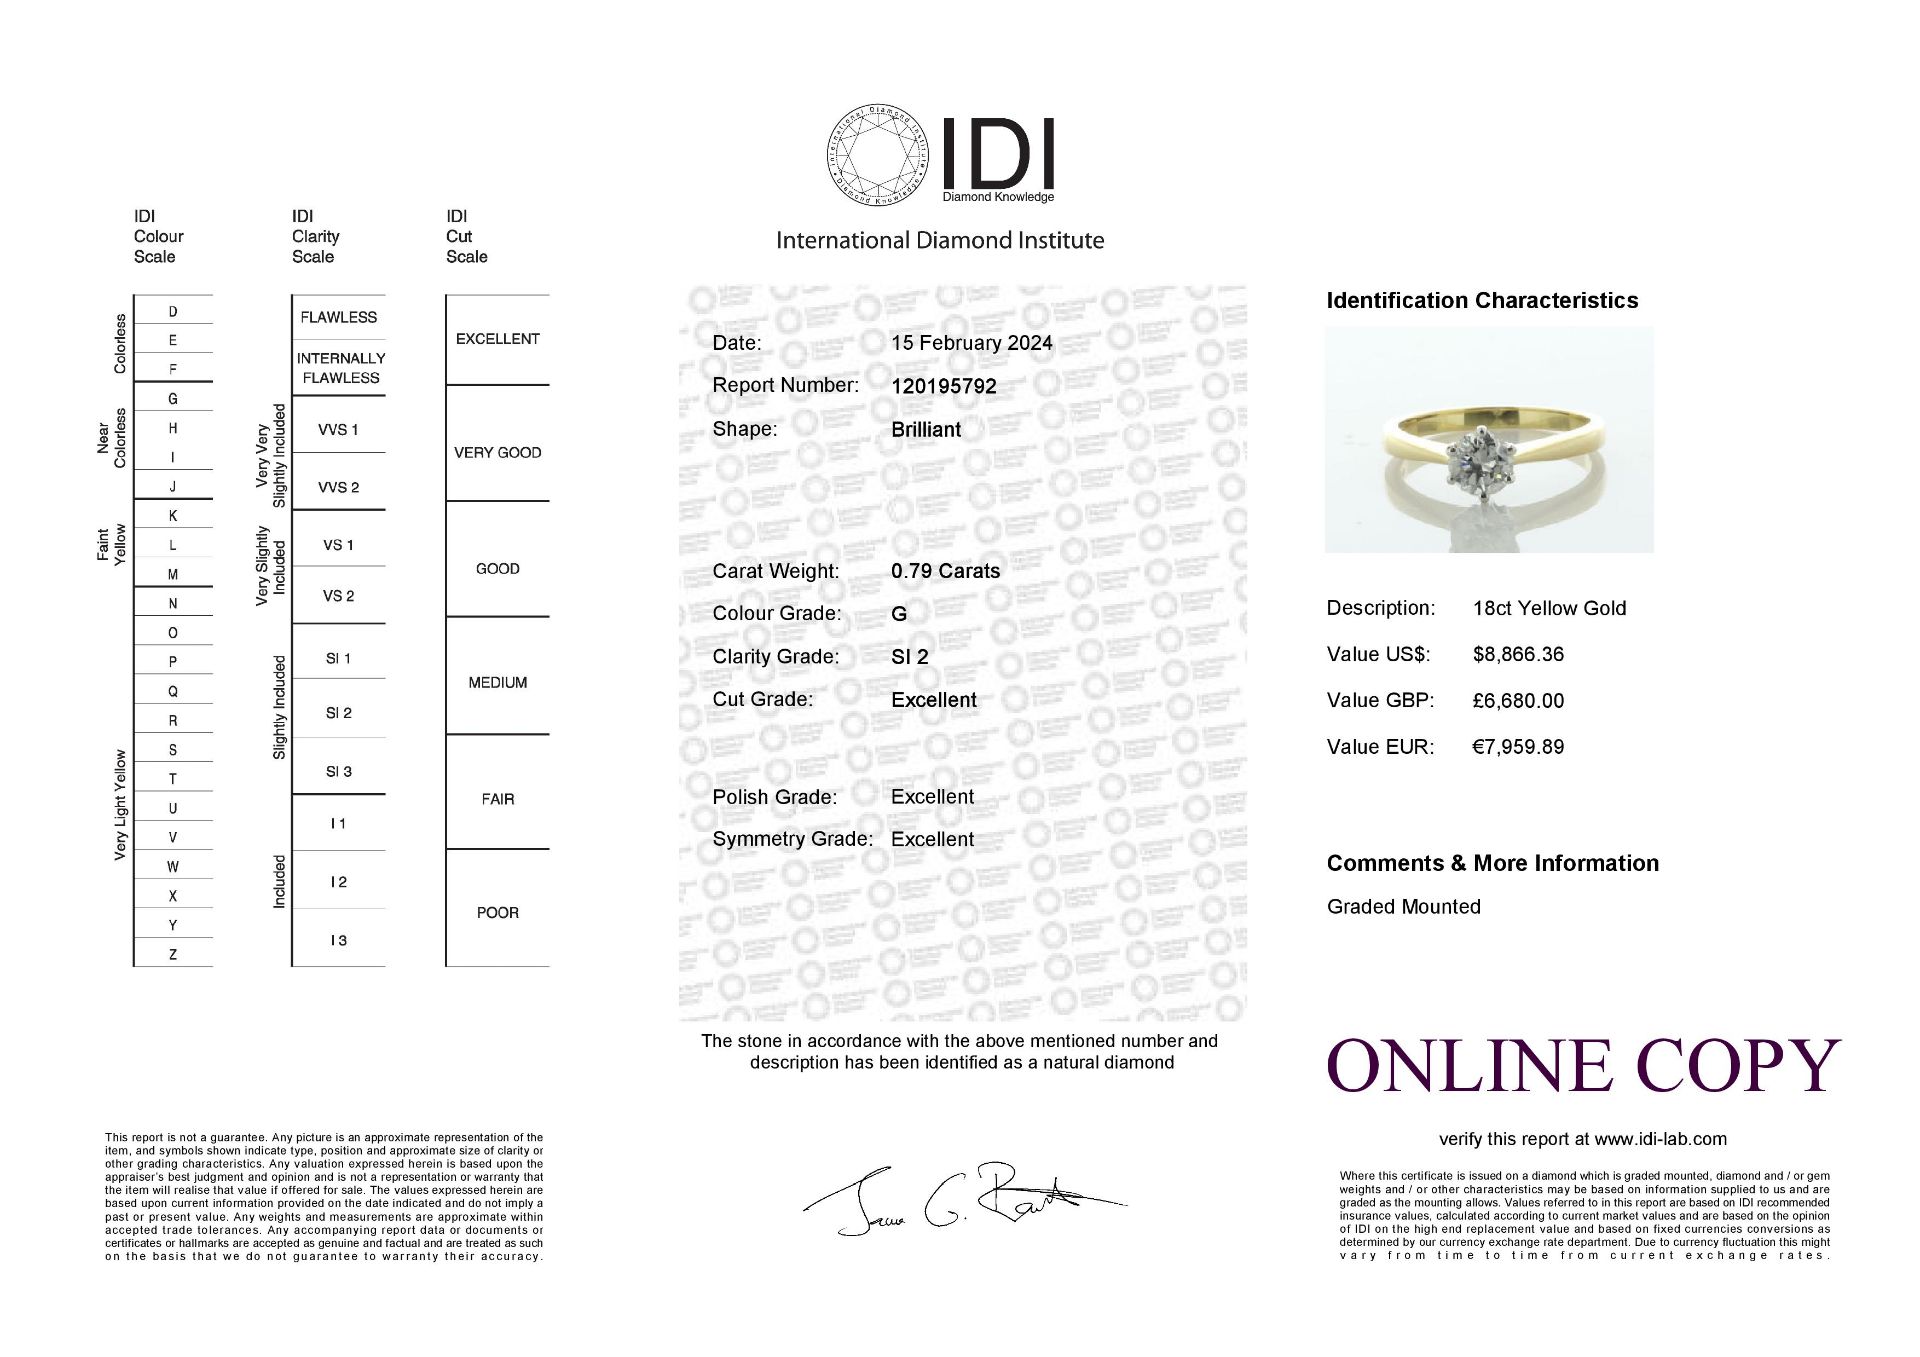 18ct Yellow Gold Single Stone Six Claw Set Diamond Ring 0.79 Carats - Valued By IDI £6,680.00 - - Image 6 of 6